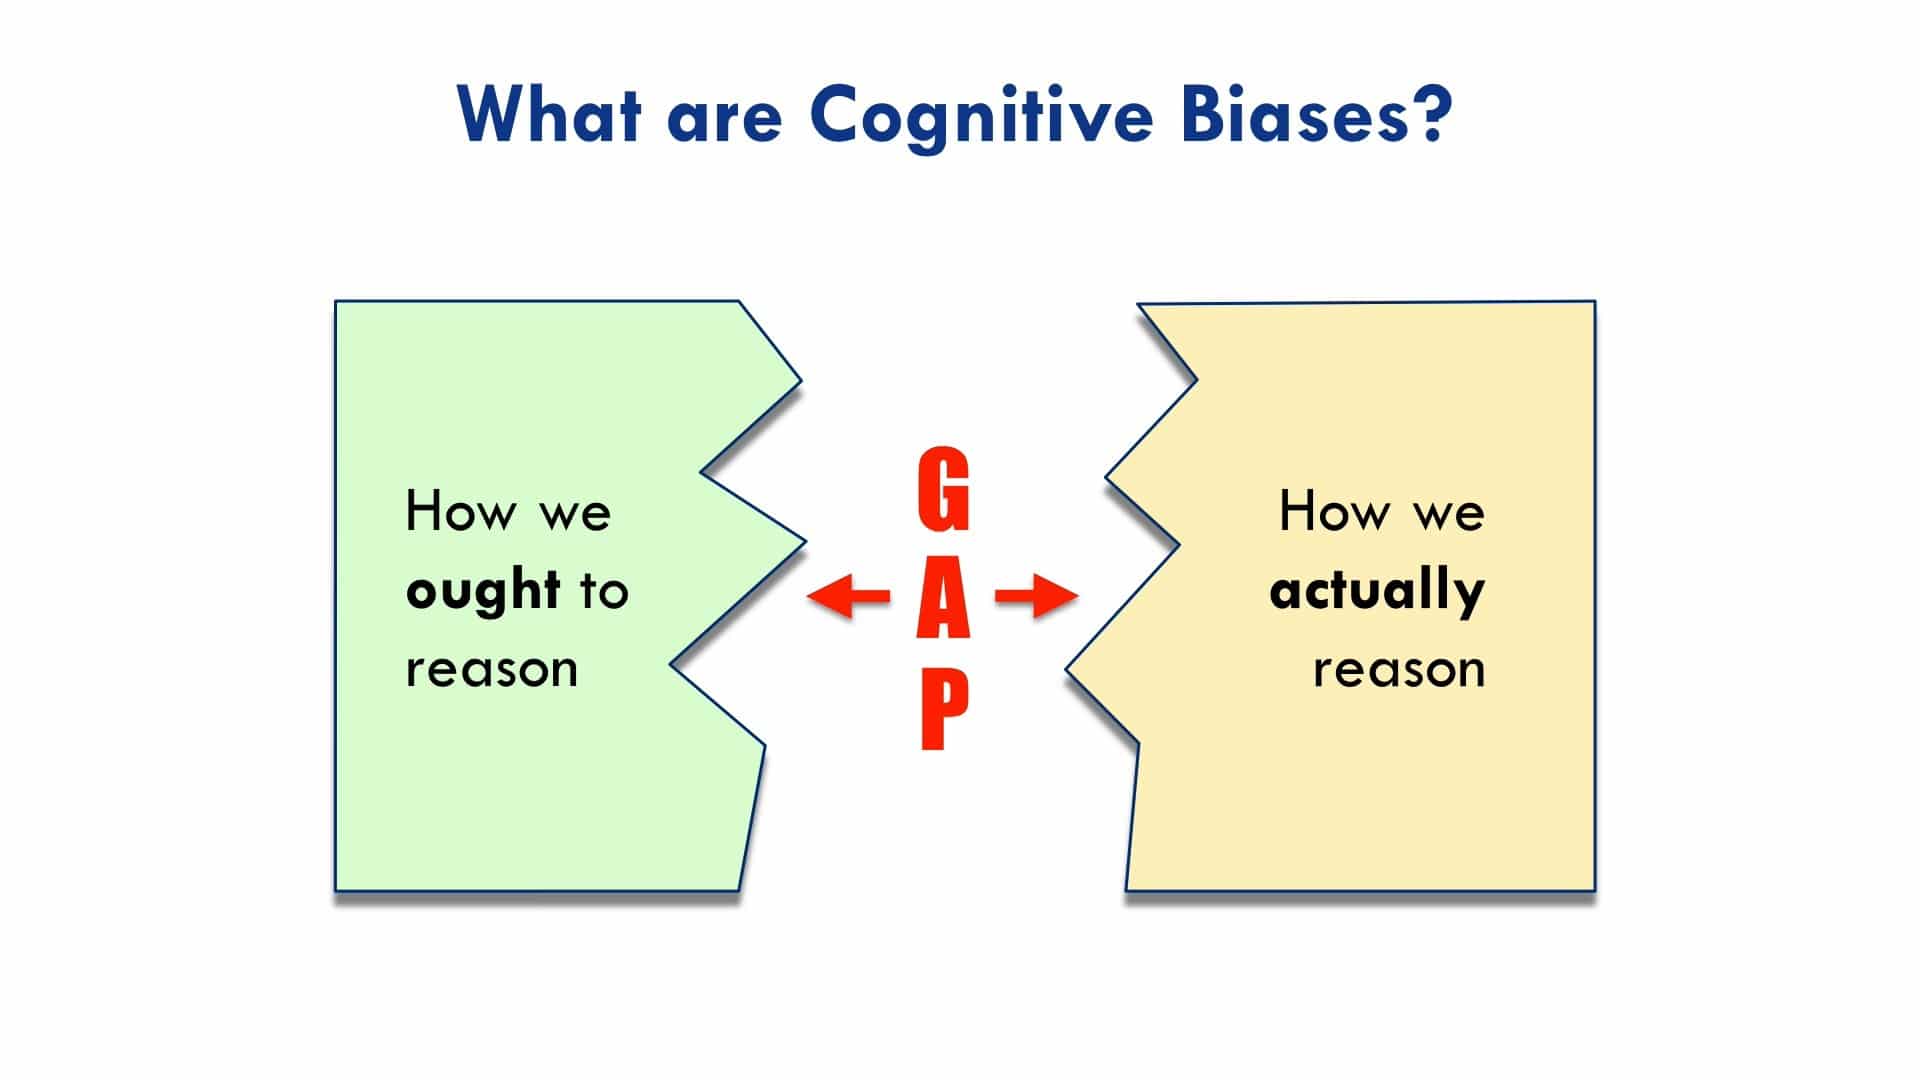 Definition of cognitive biases in corporate governance